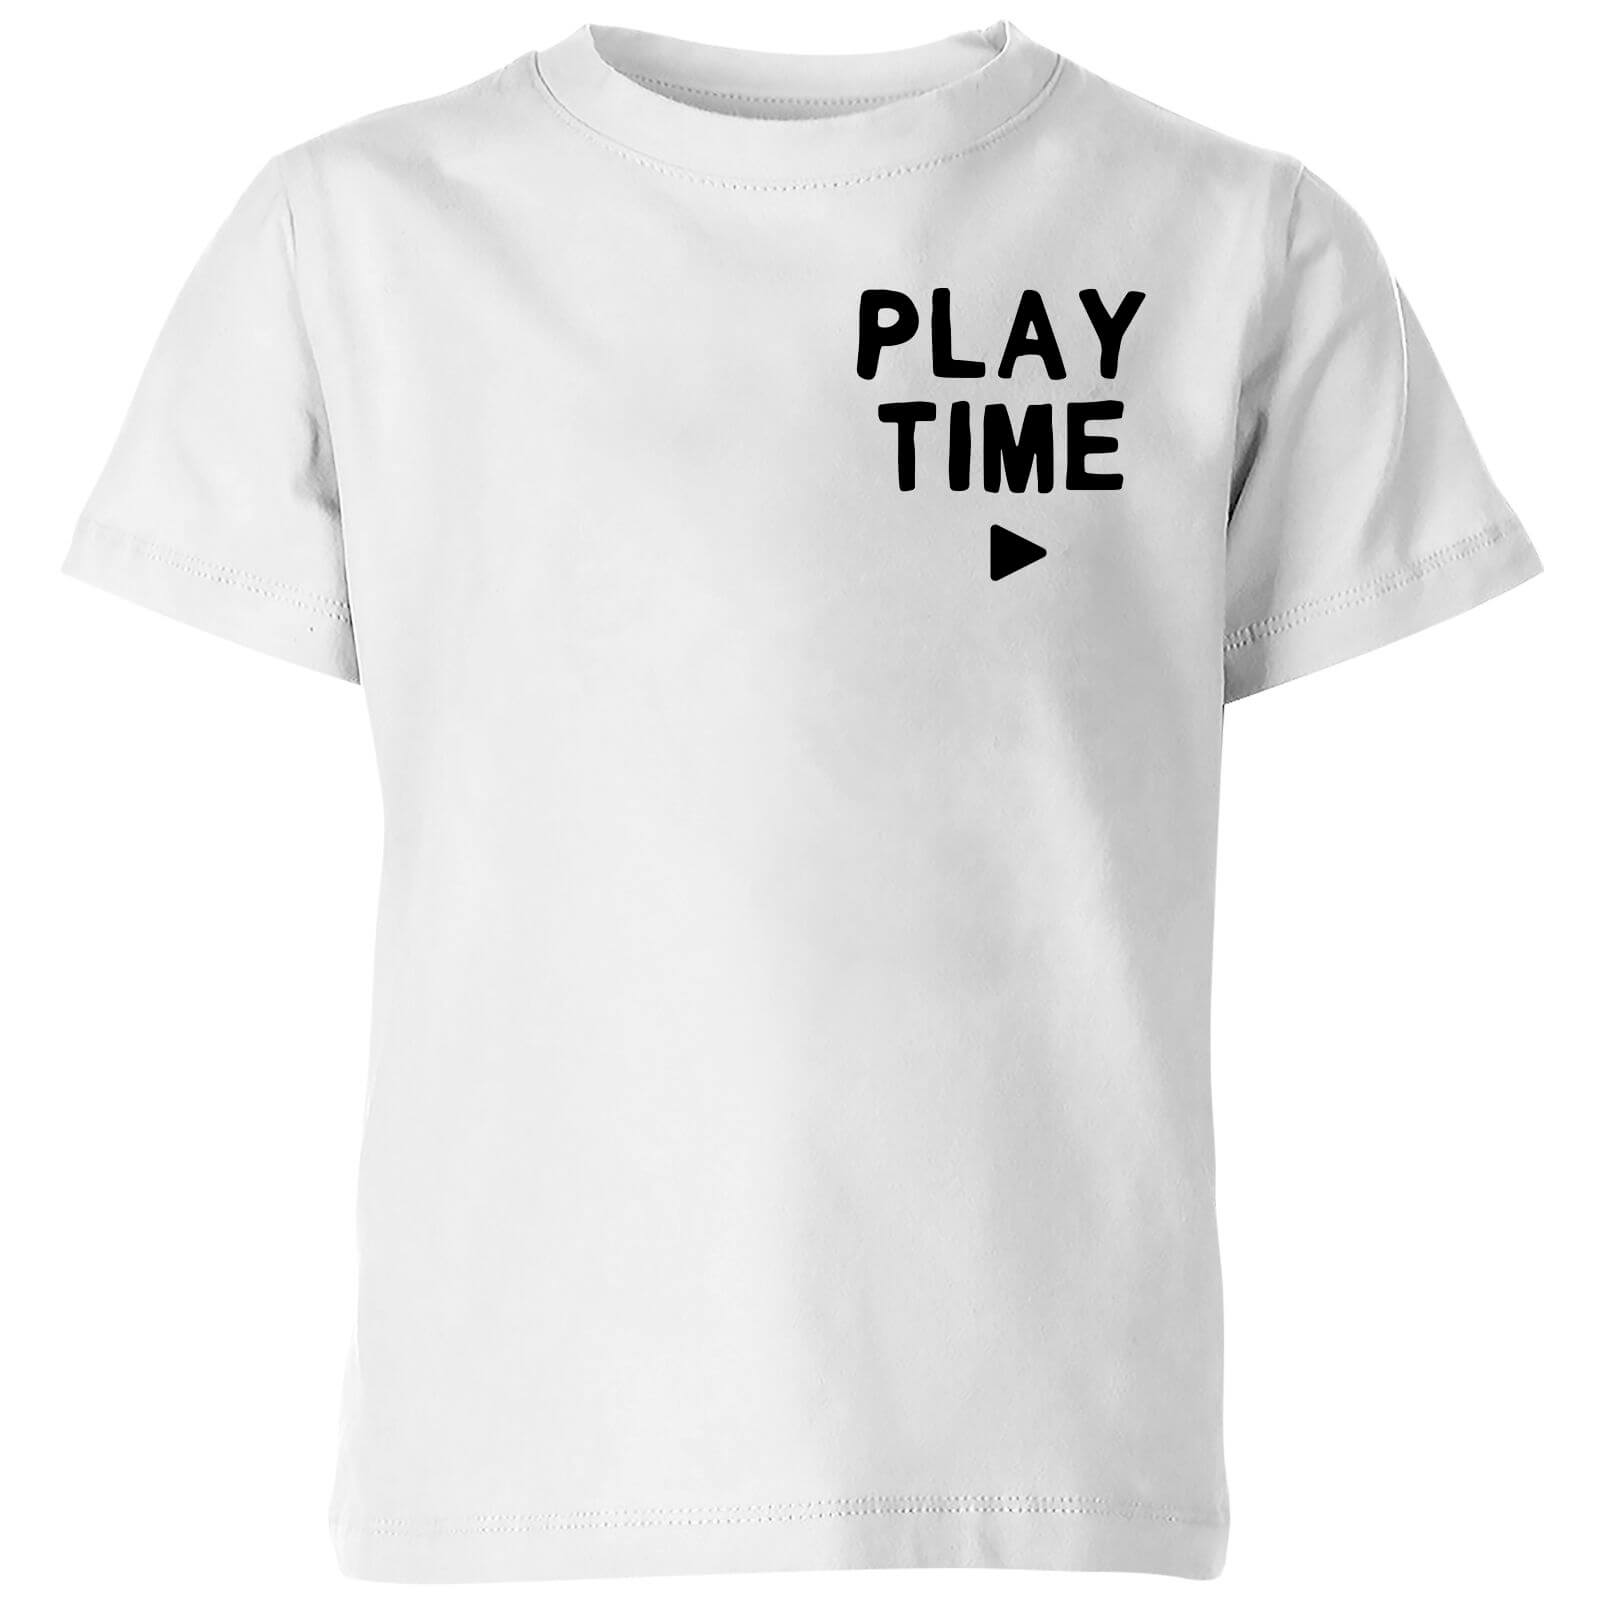 My Little Rascal Play Time Kids' T-Shirt - White - 5-6 Years - White